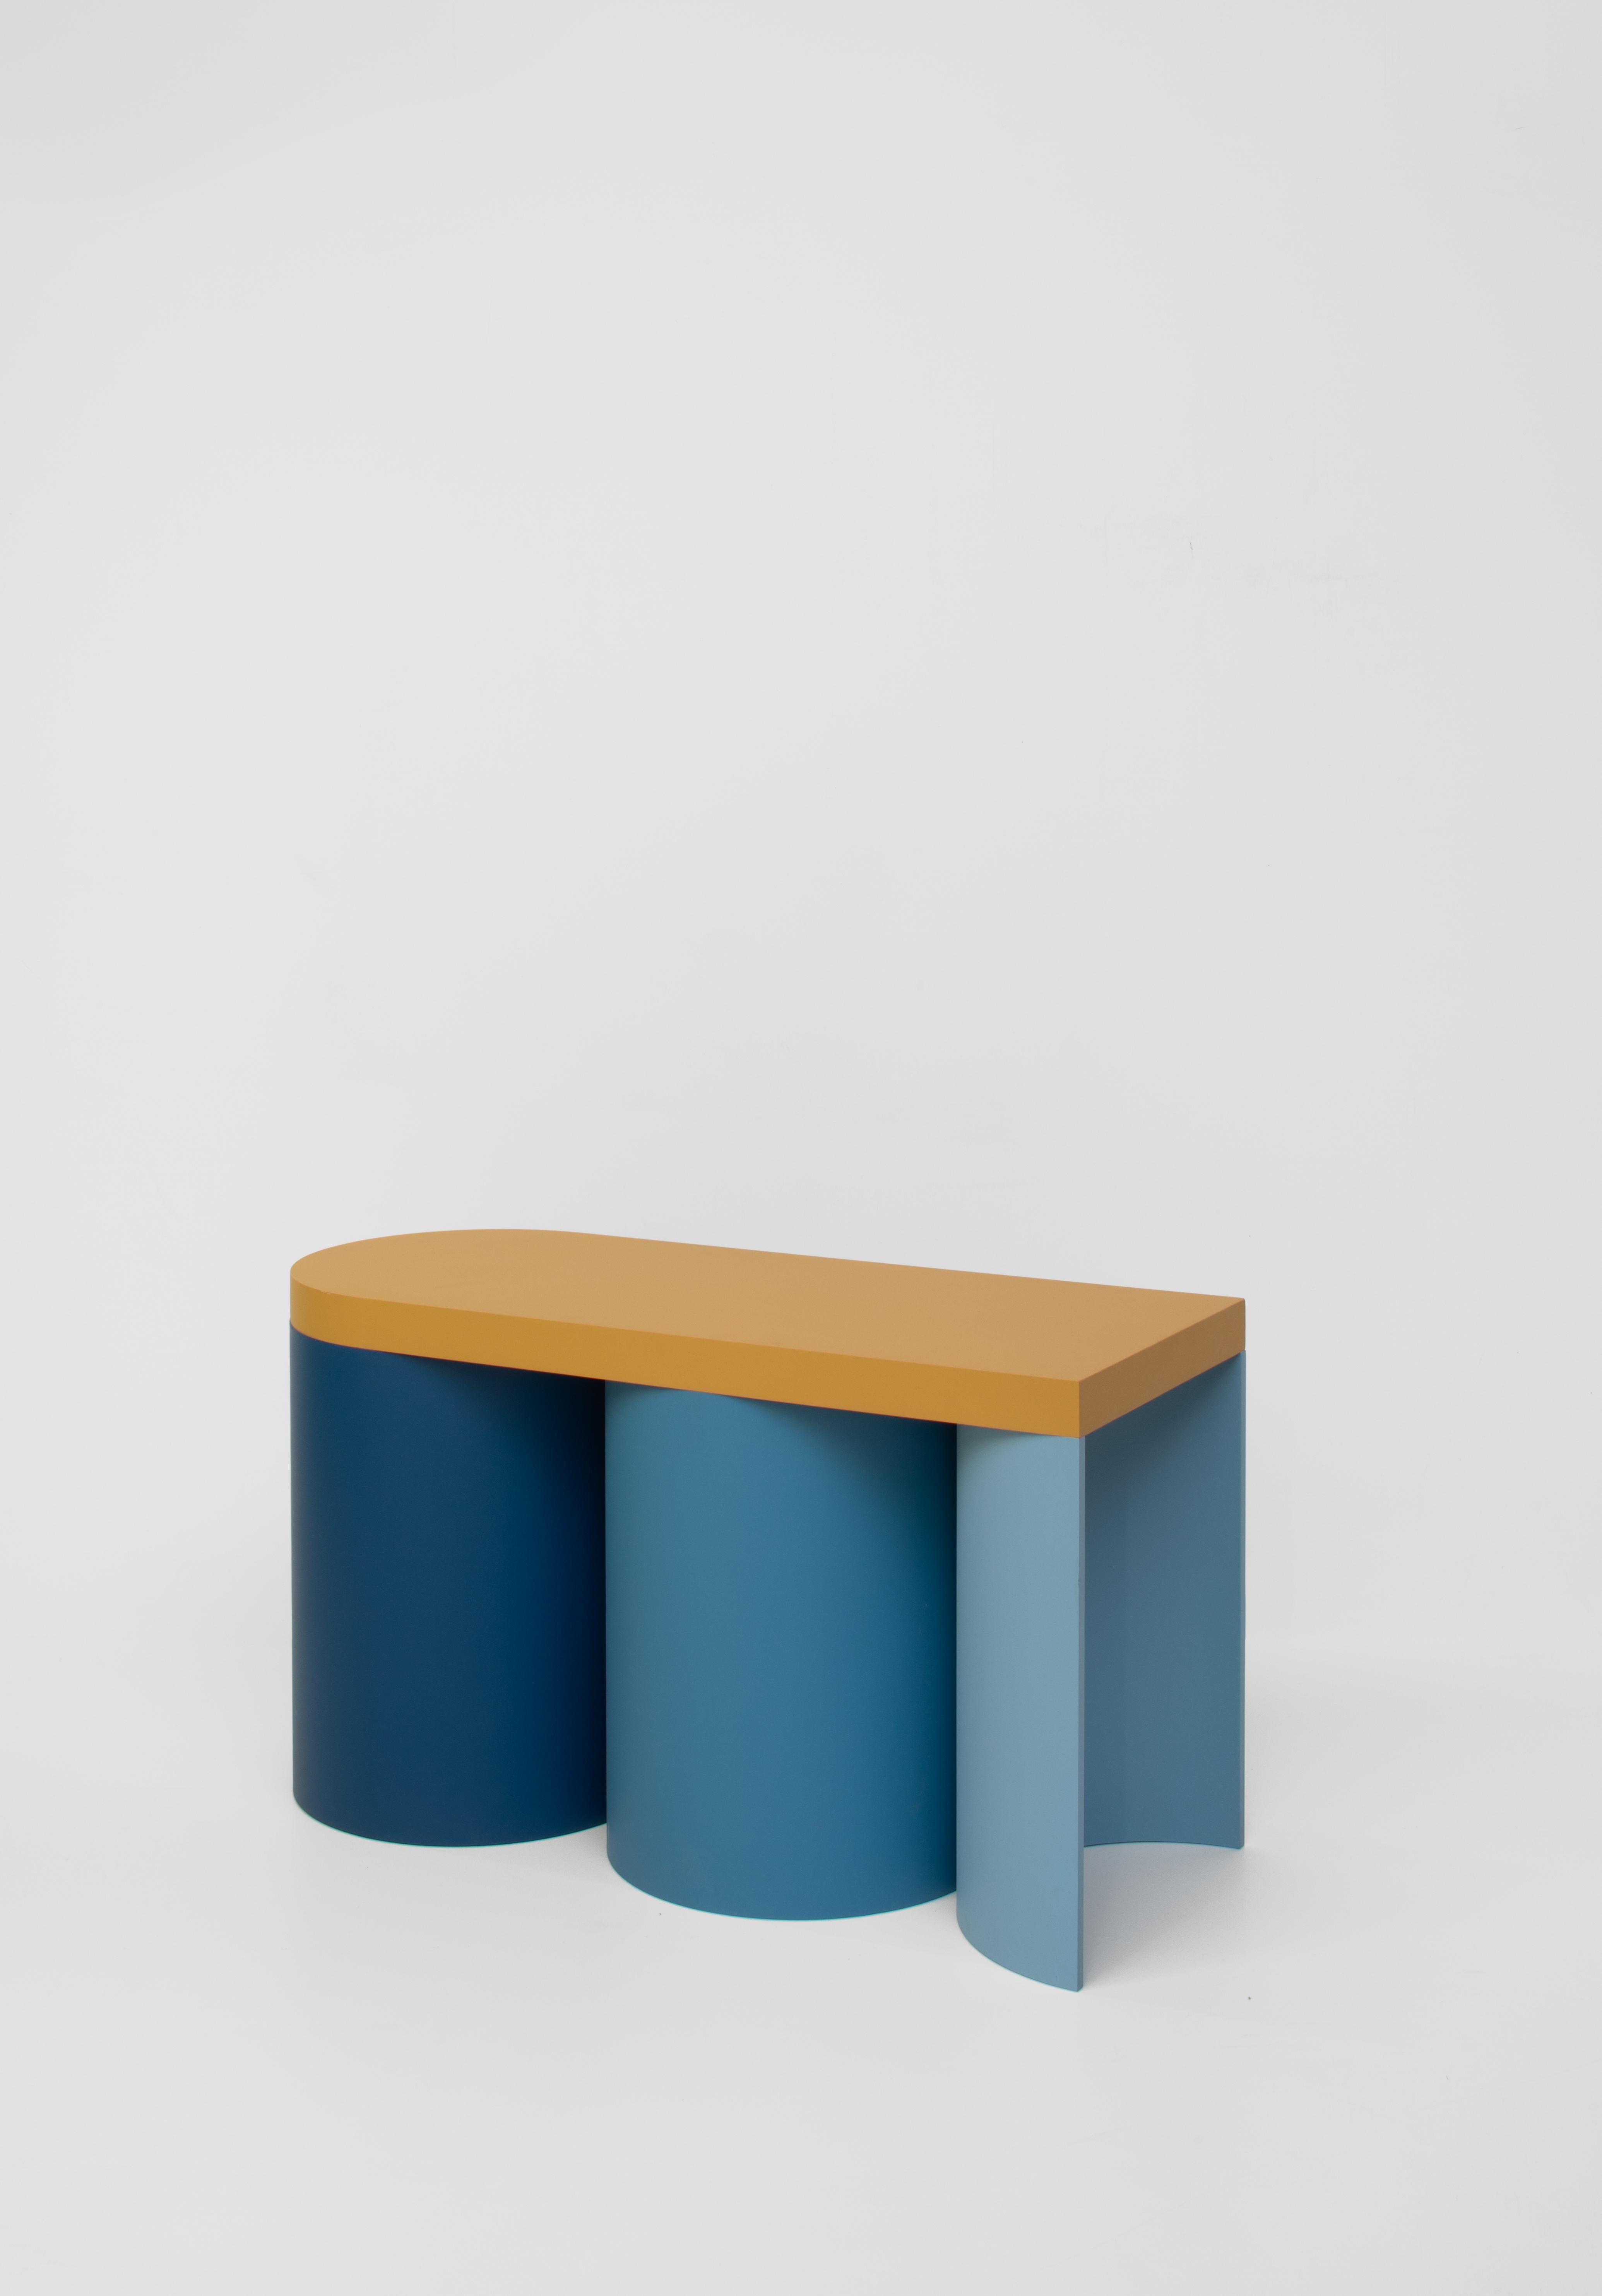 Colourful stool with a contemporary design.
Manufactured in an artisanal way, in which every step of the process is carefully executed. The base of this stool consists of varying numbers of hollow cylinders. It's topped with a slab surface for